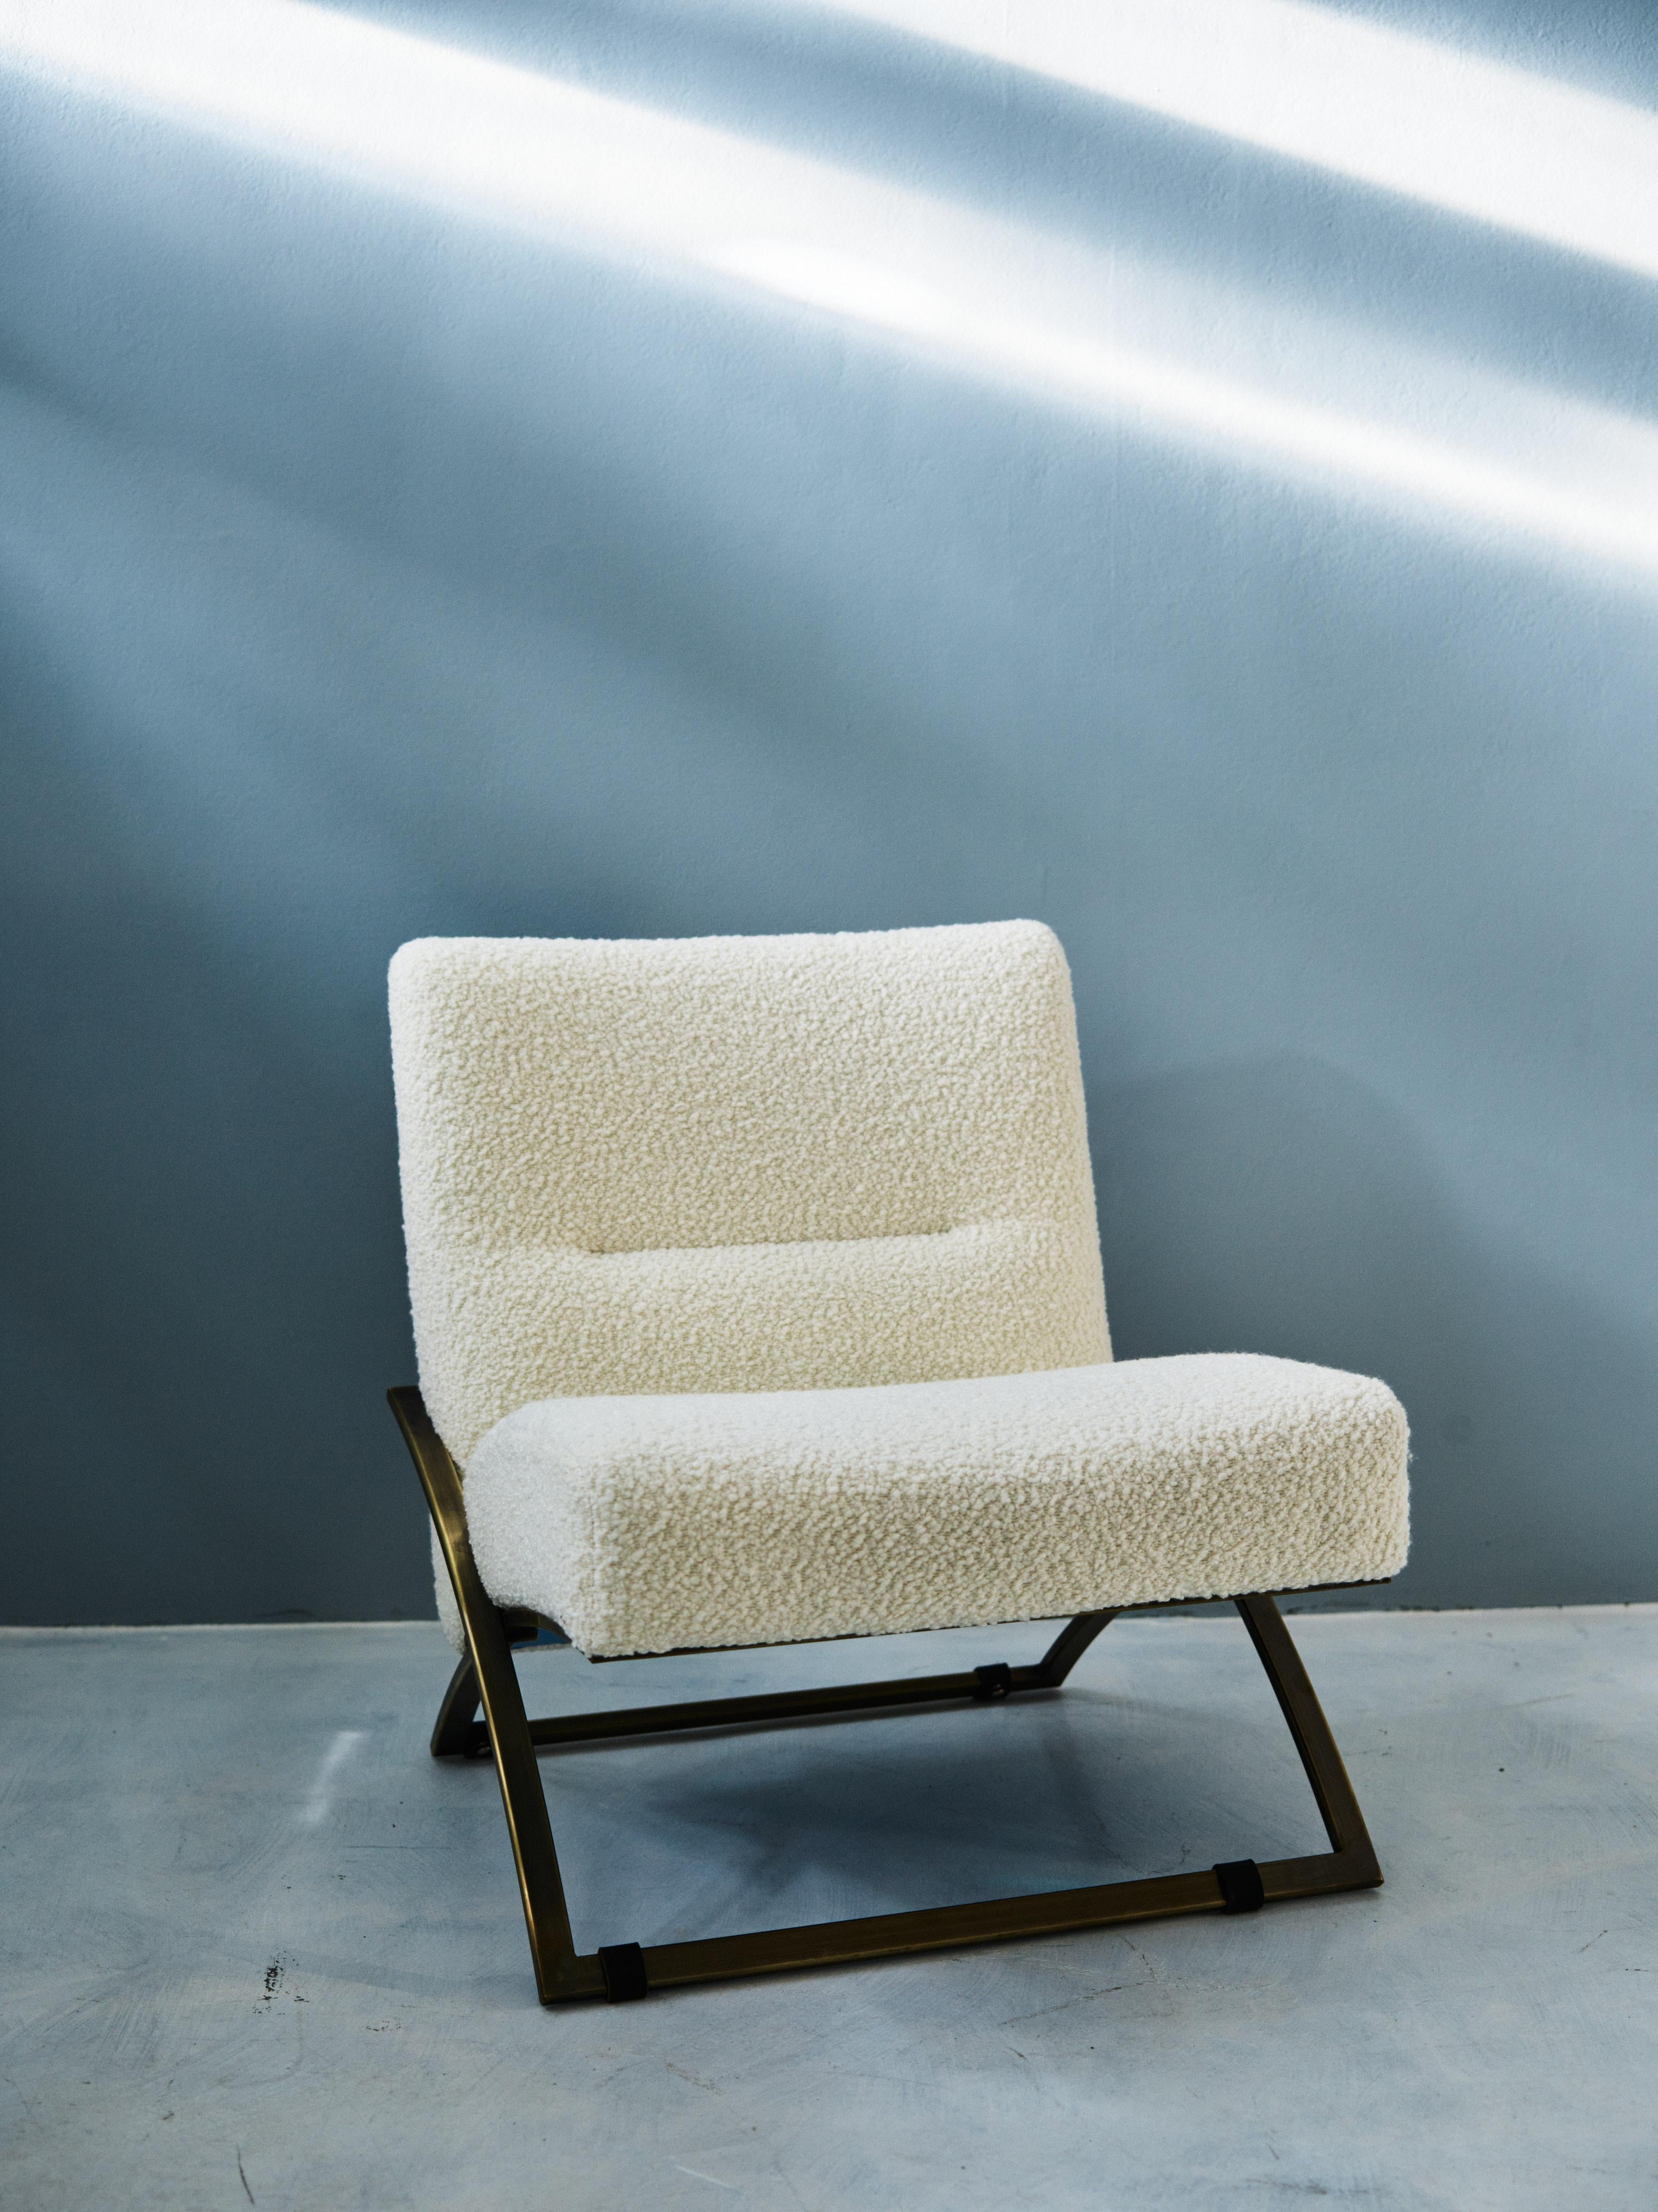 The mid-century modern Wave S11 armchair was designed by Peter Ghyczy in 2016 and hand-crafted in the GHYCZY atelier in the South of the Netherlands. The Wave S11 armchair features an ergonomic and dynamic frame composed of aged brass tubing and a